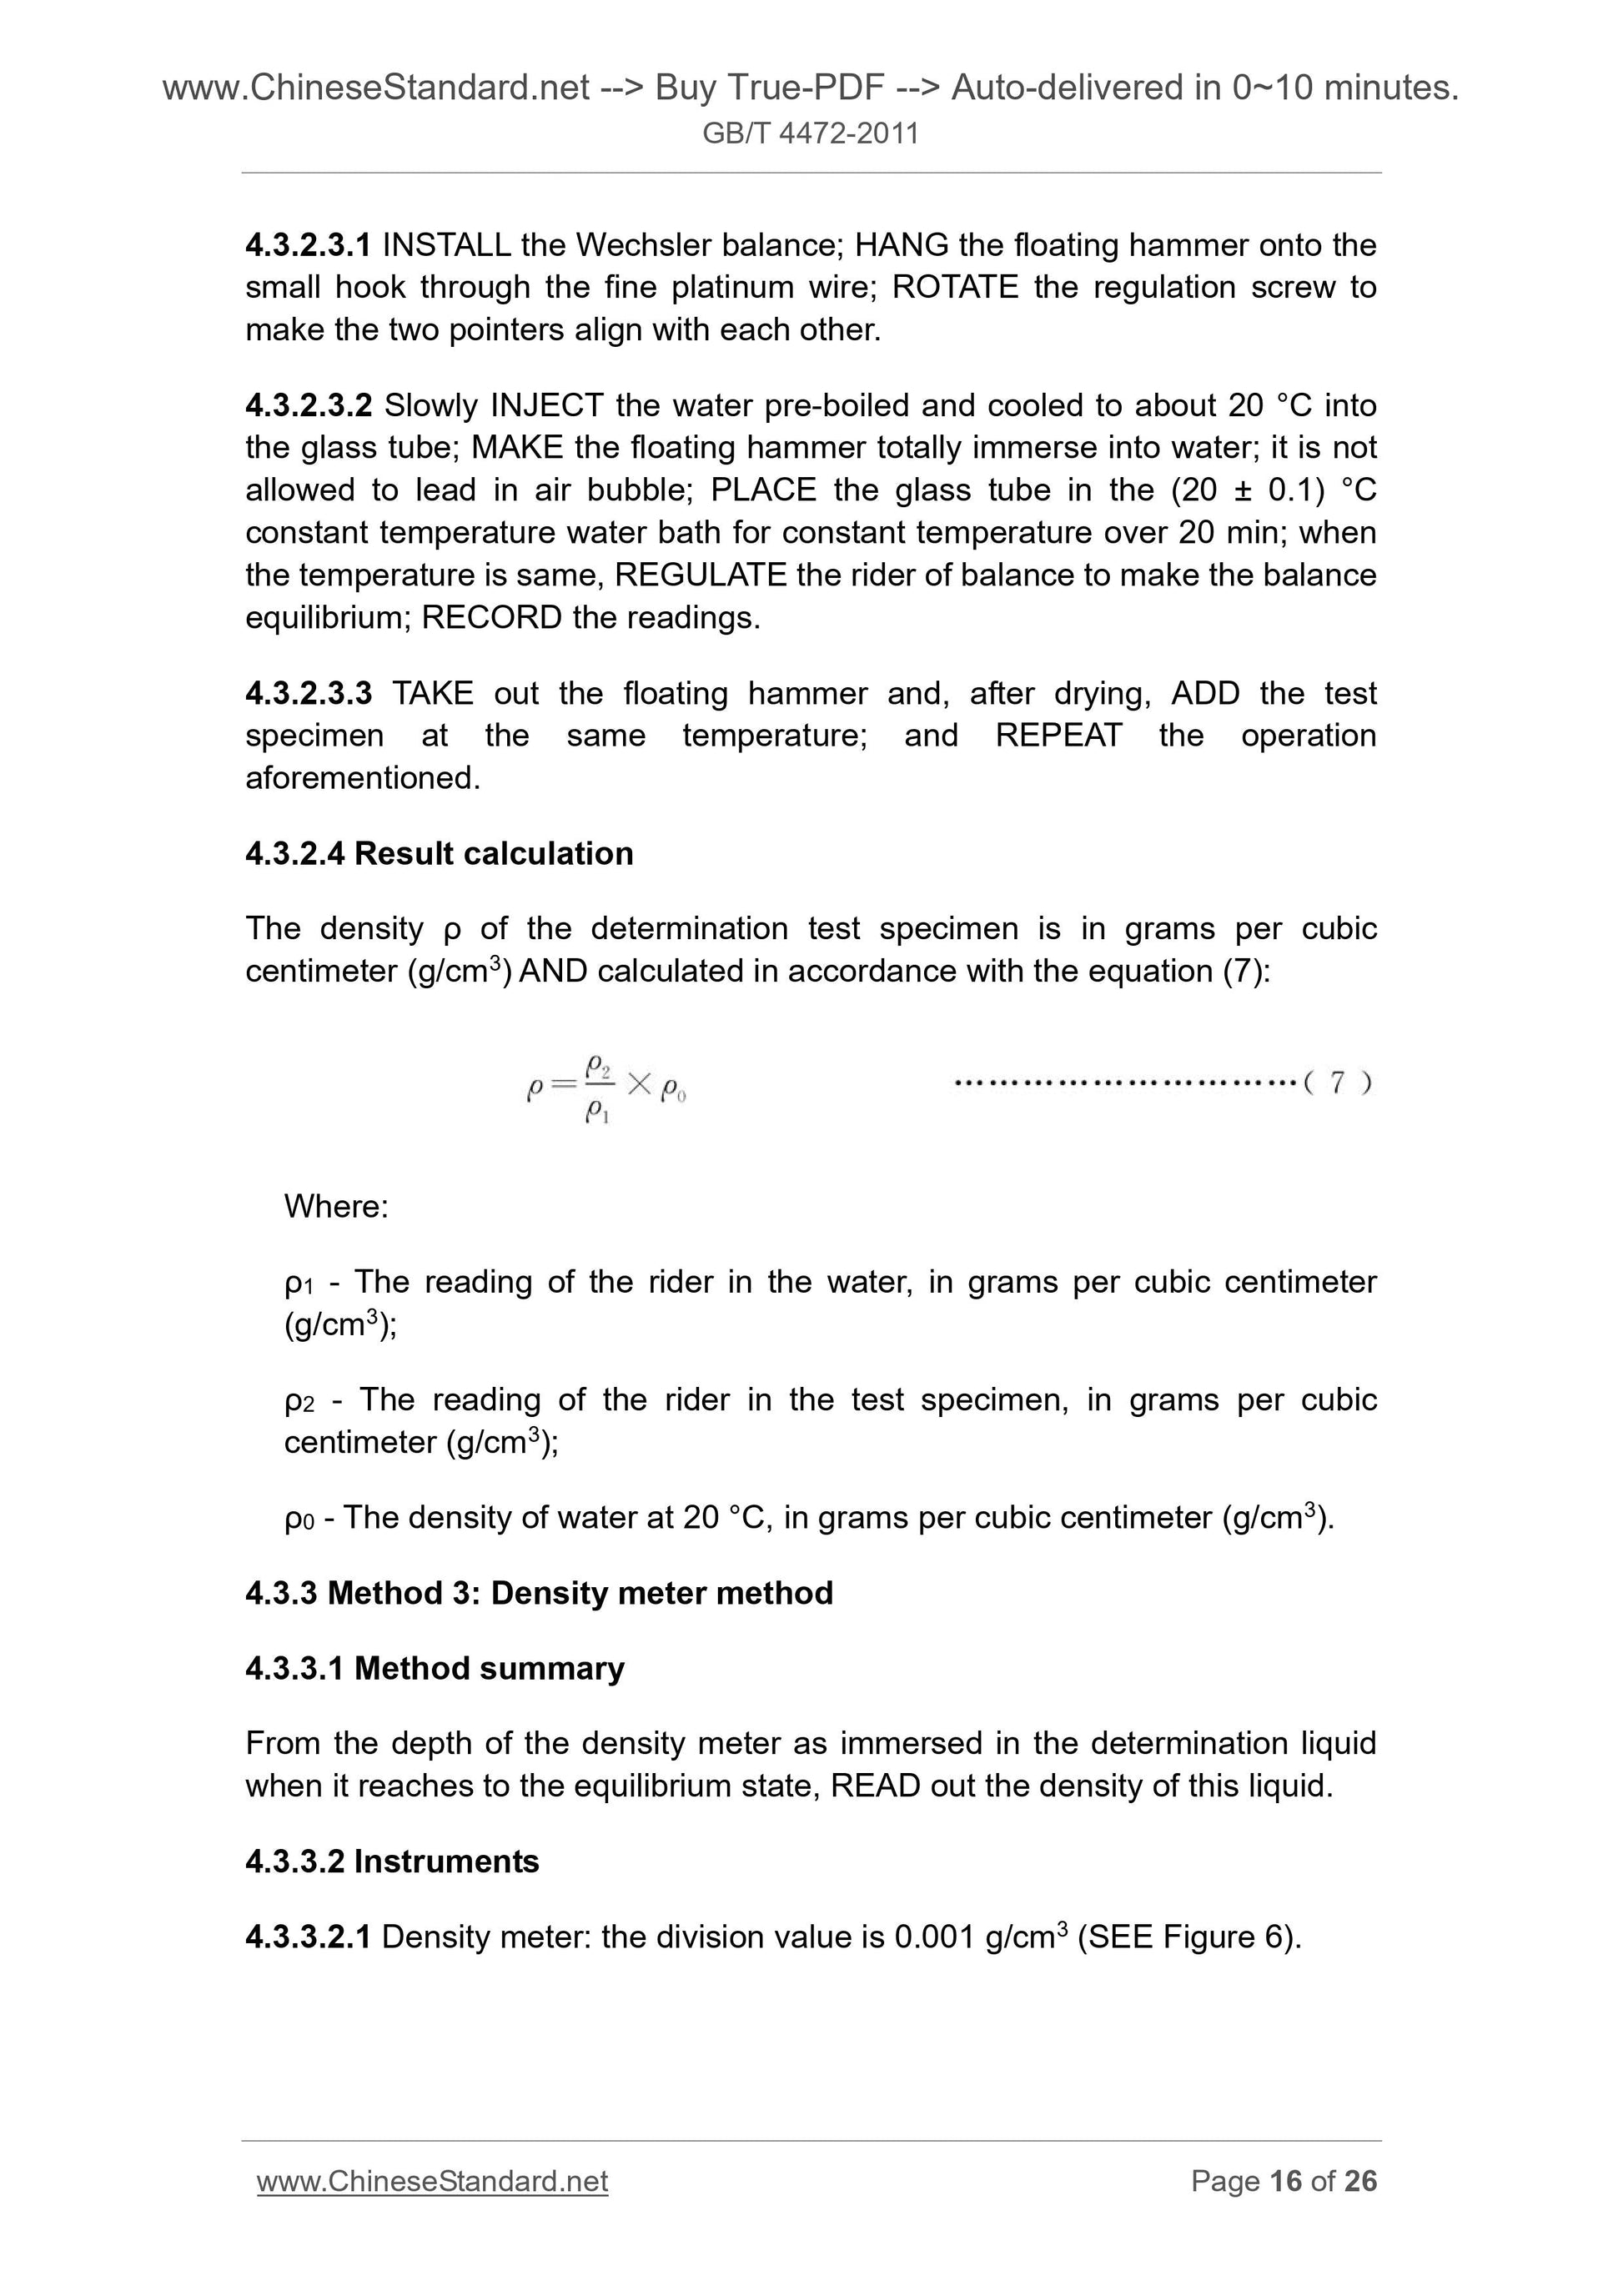 GB/T 4472-2011 Page 9